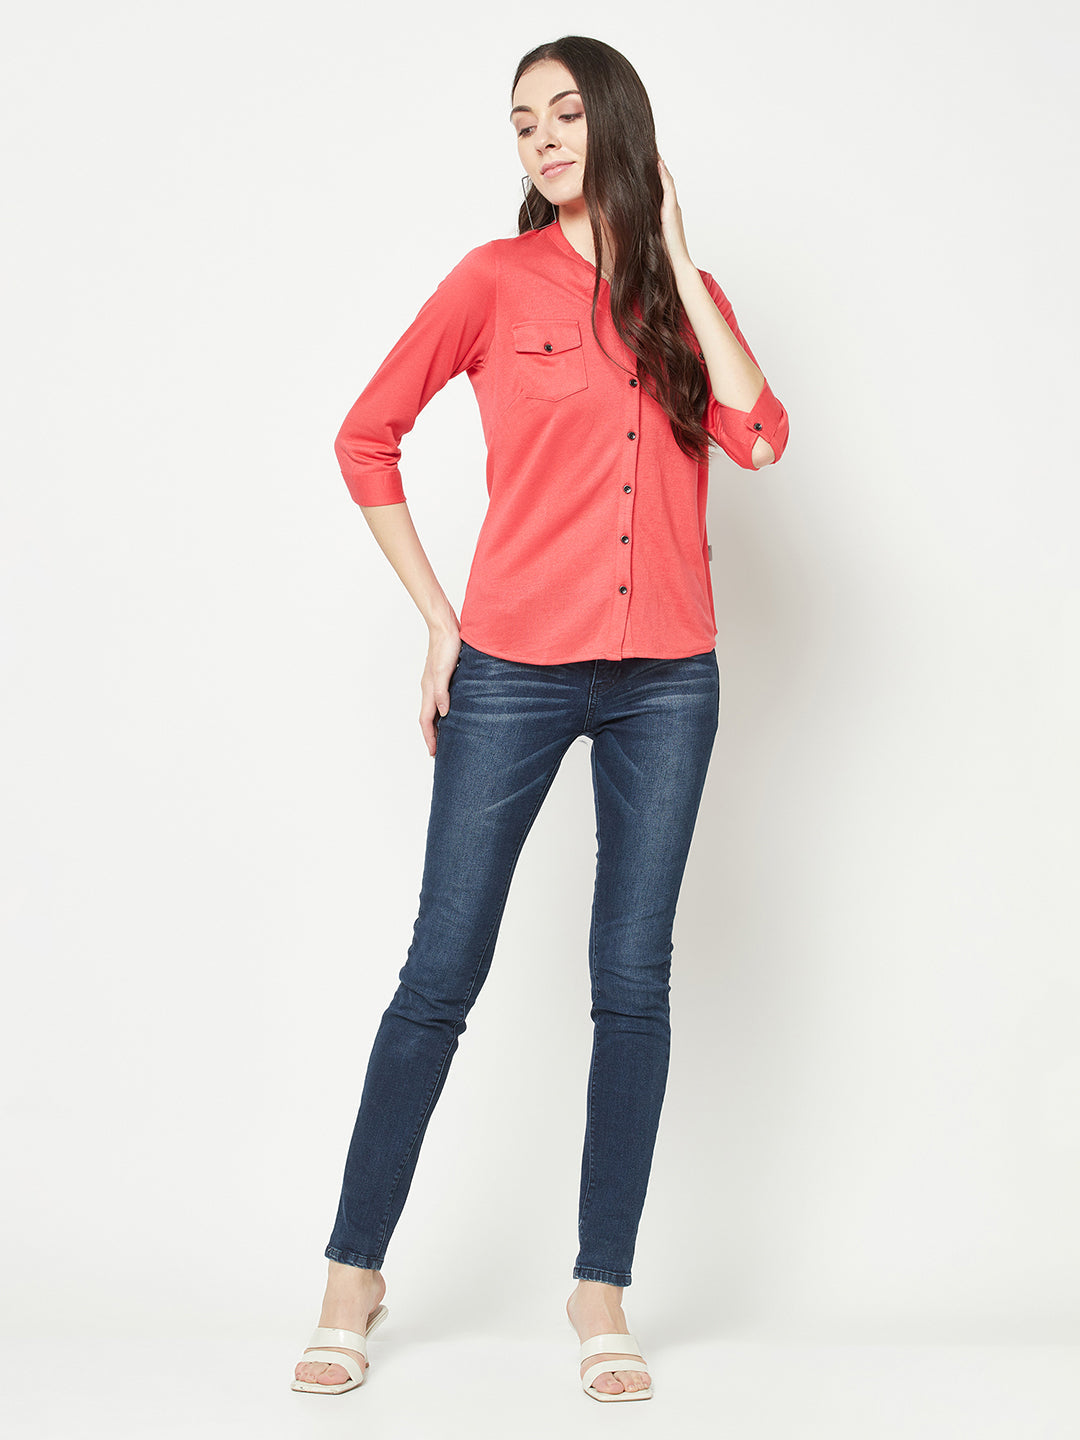  Pink Shirt Style Top